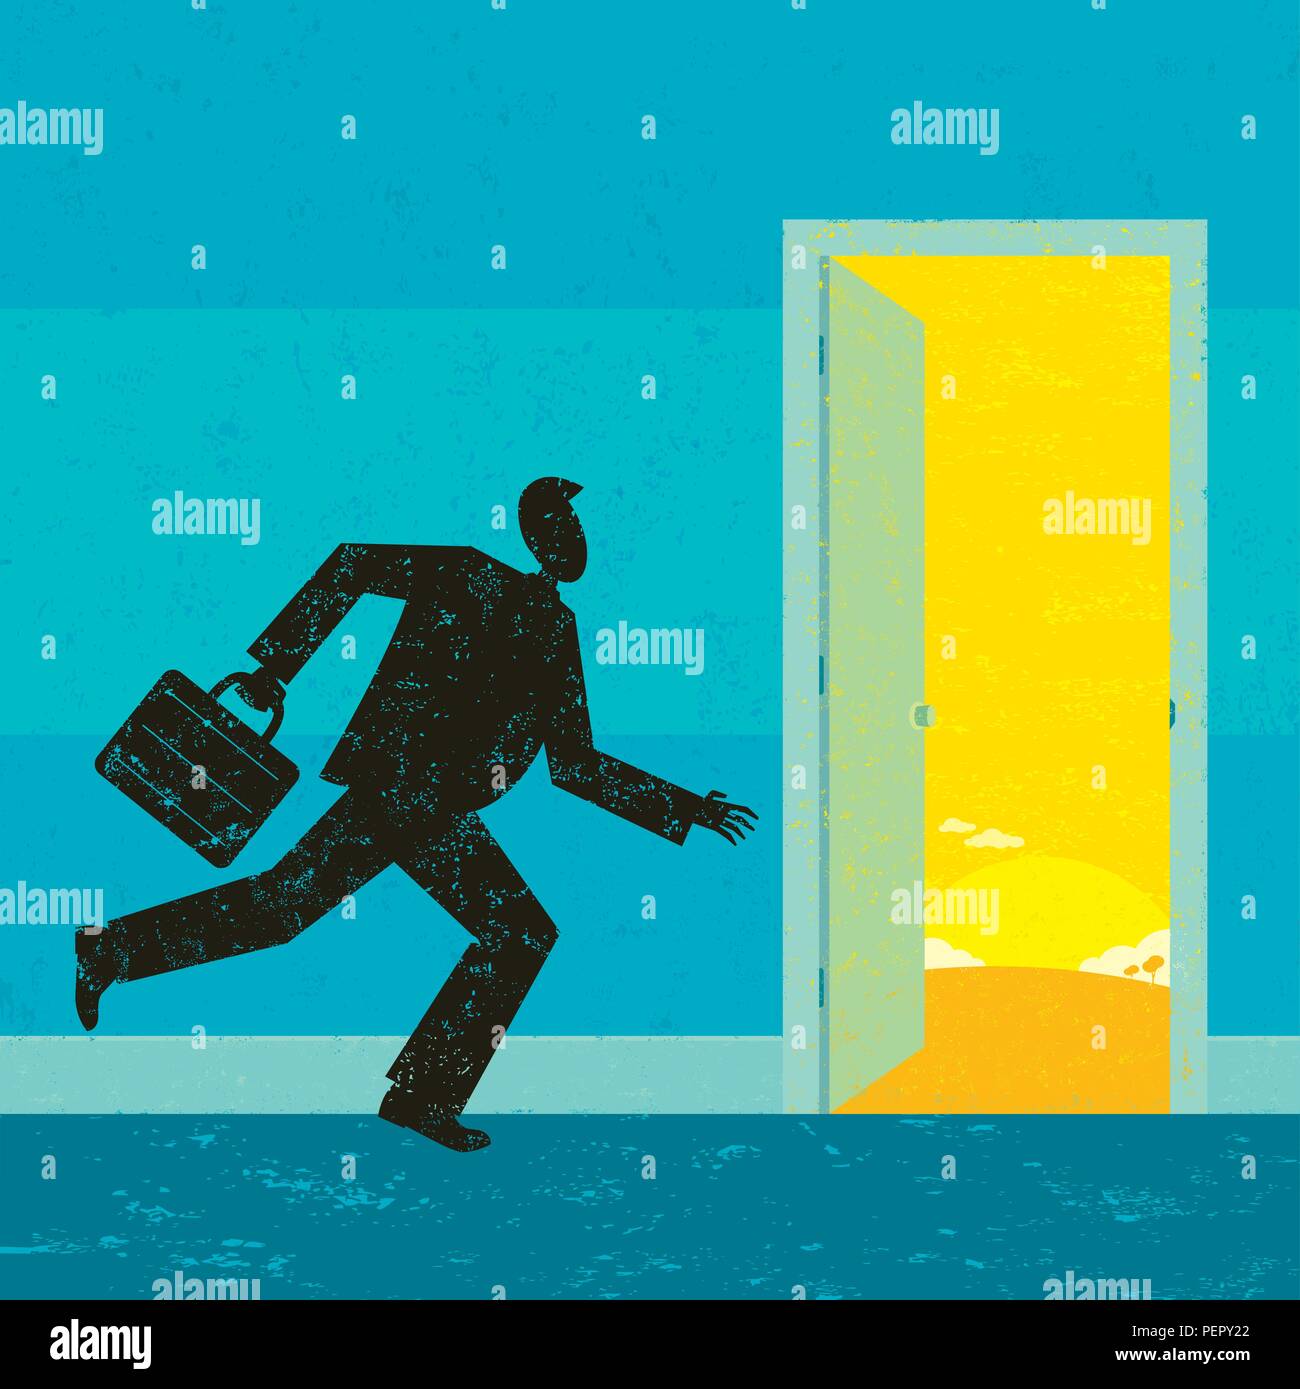 Finding New Opportunities. A businessman heading through a door to new opportunities. Stock Vector